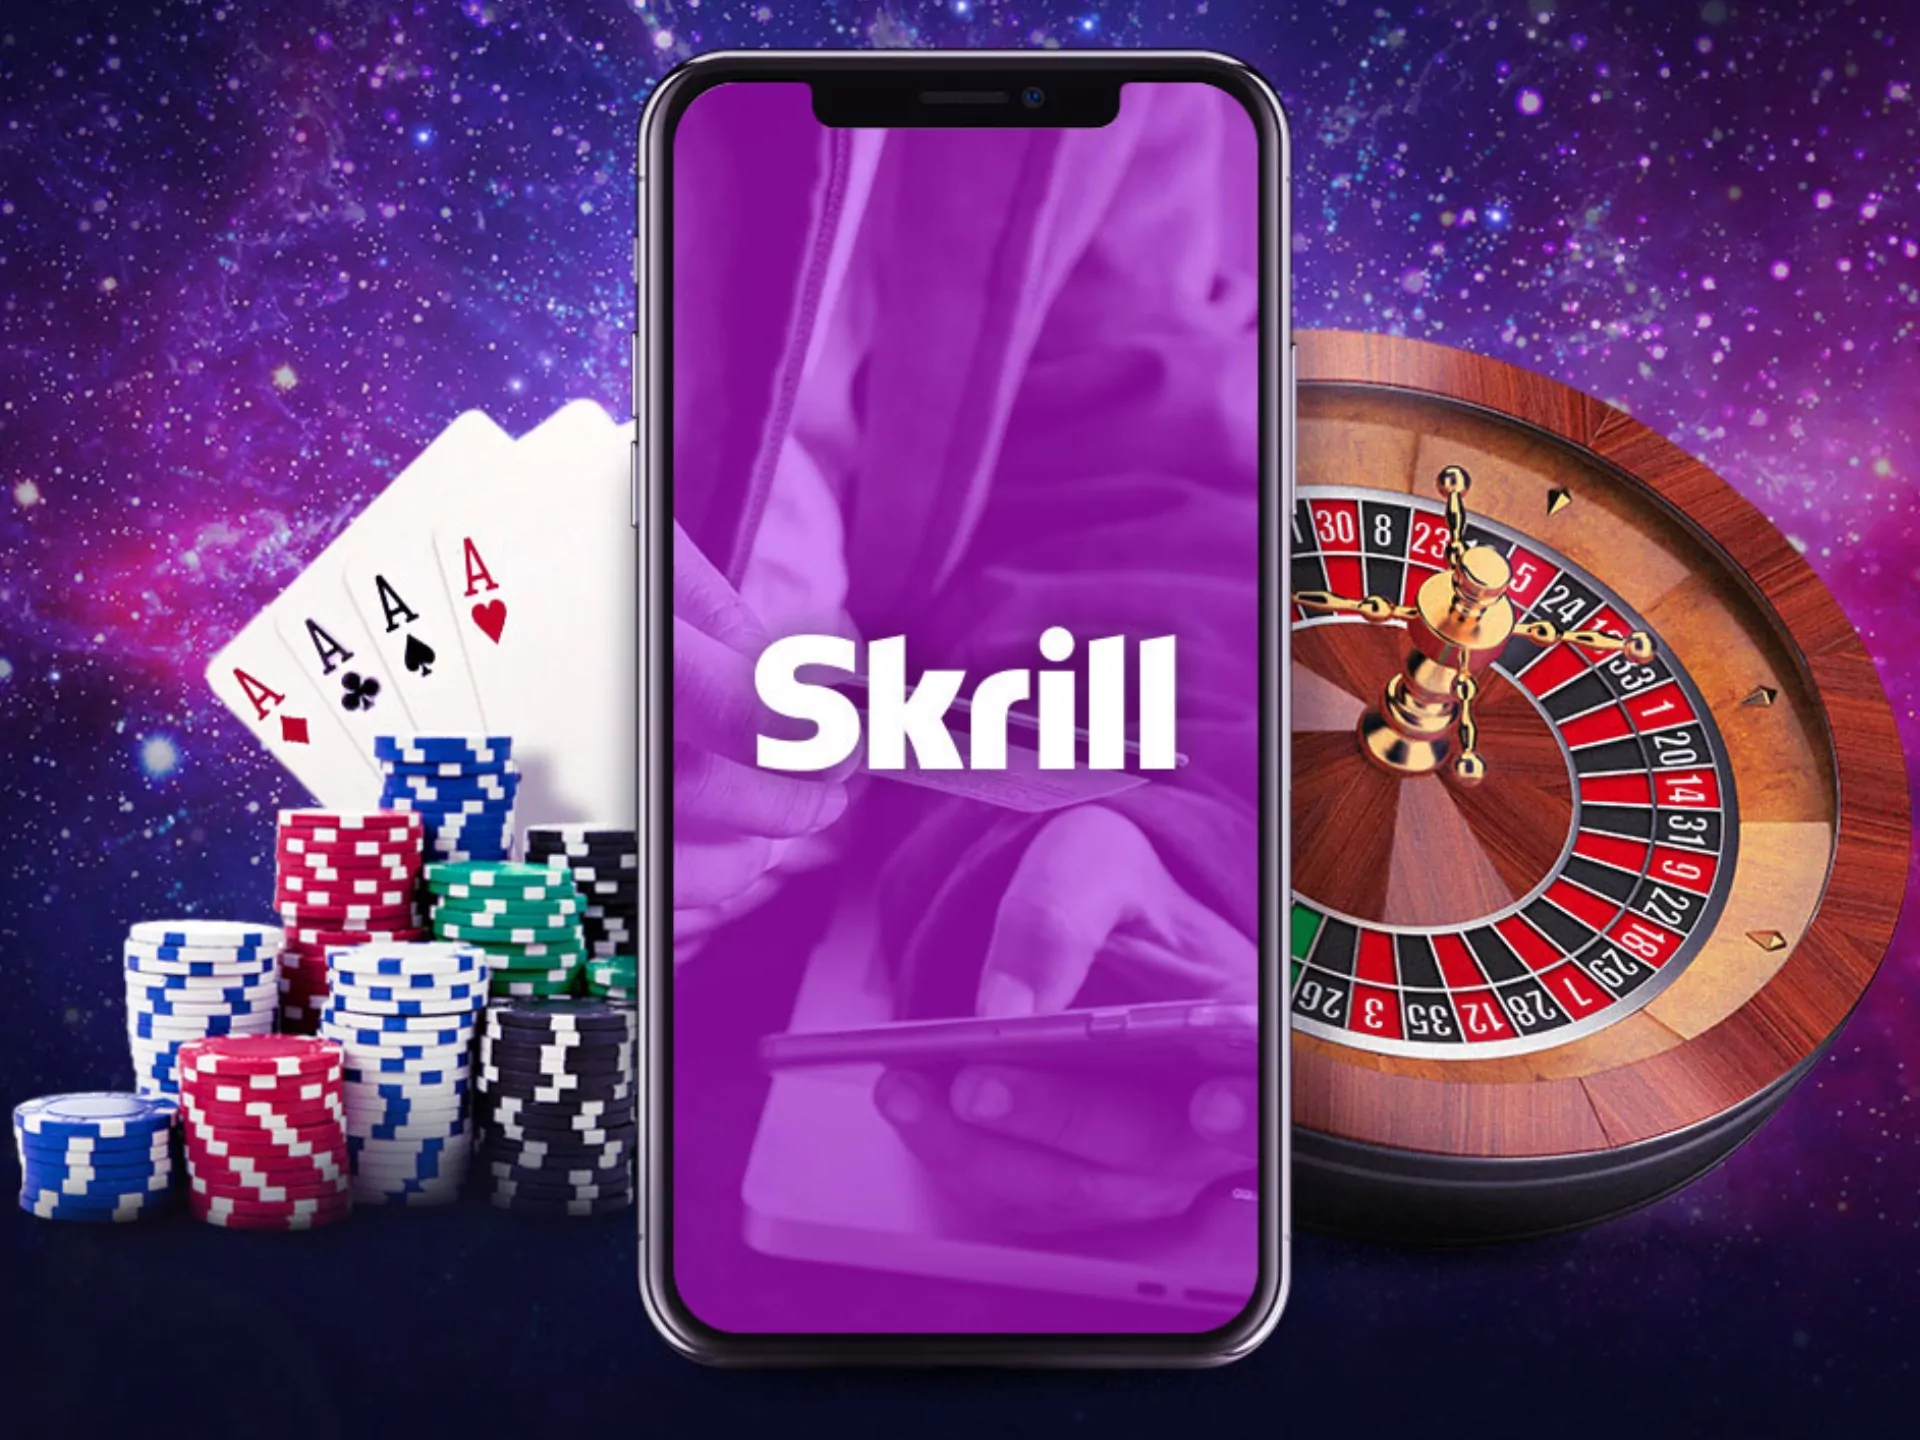 Skrill is pretty popular payment method and you can easily use it at almost every online casino.